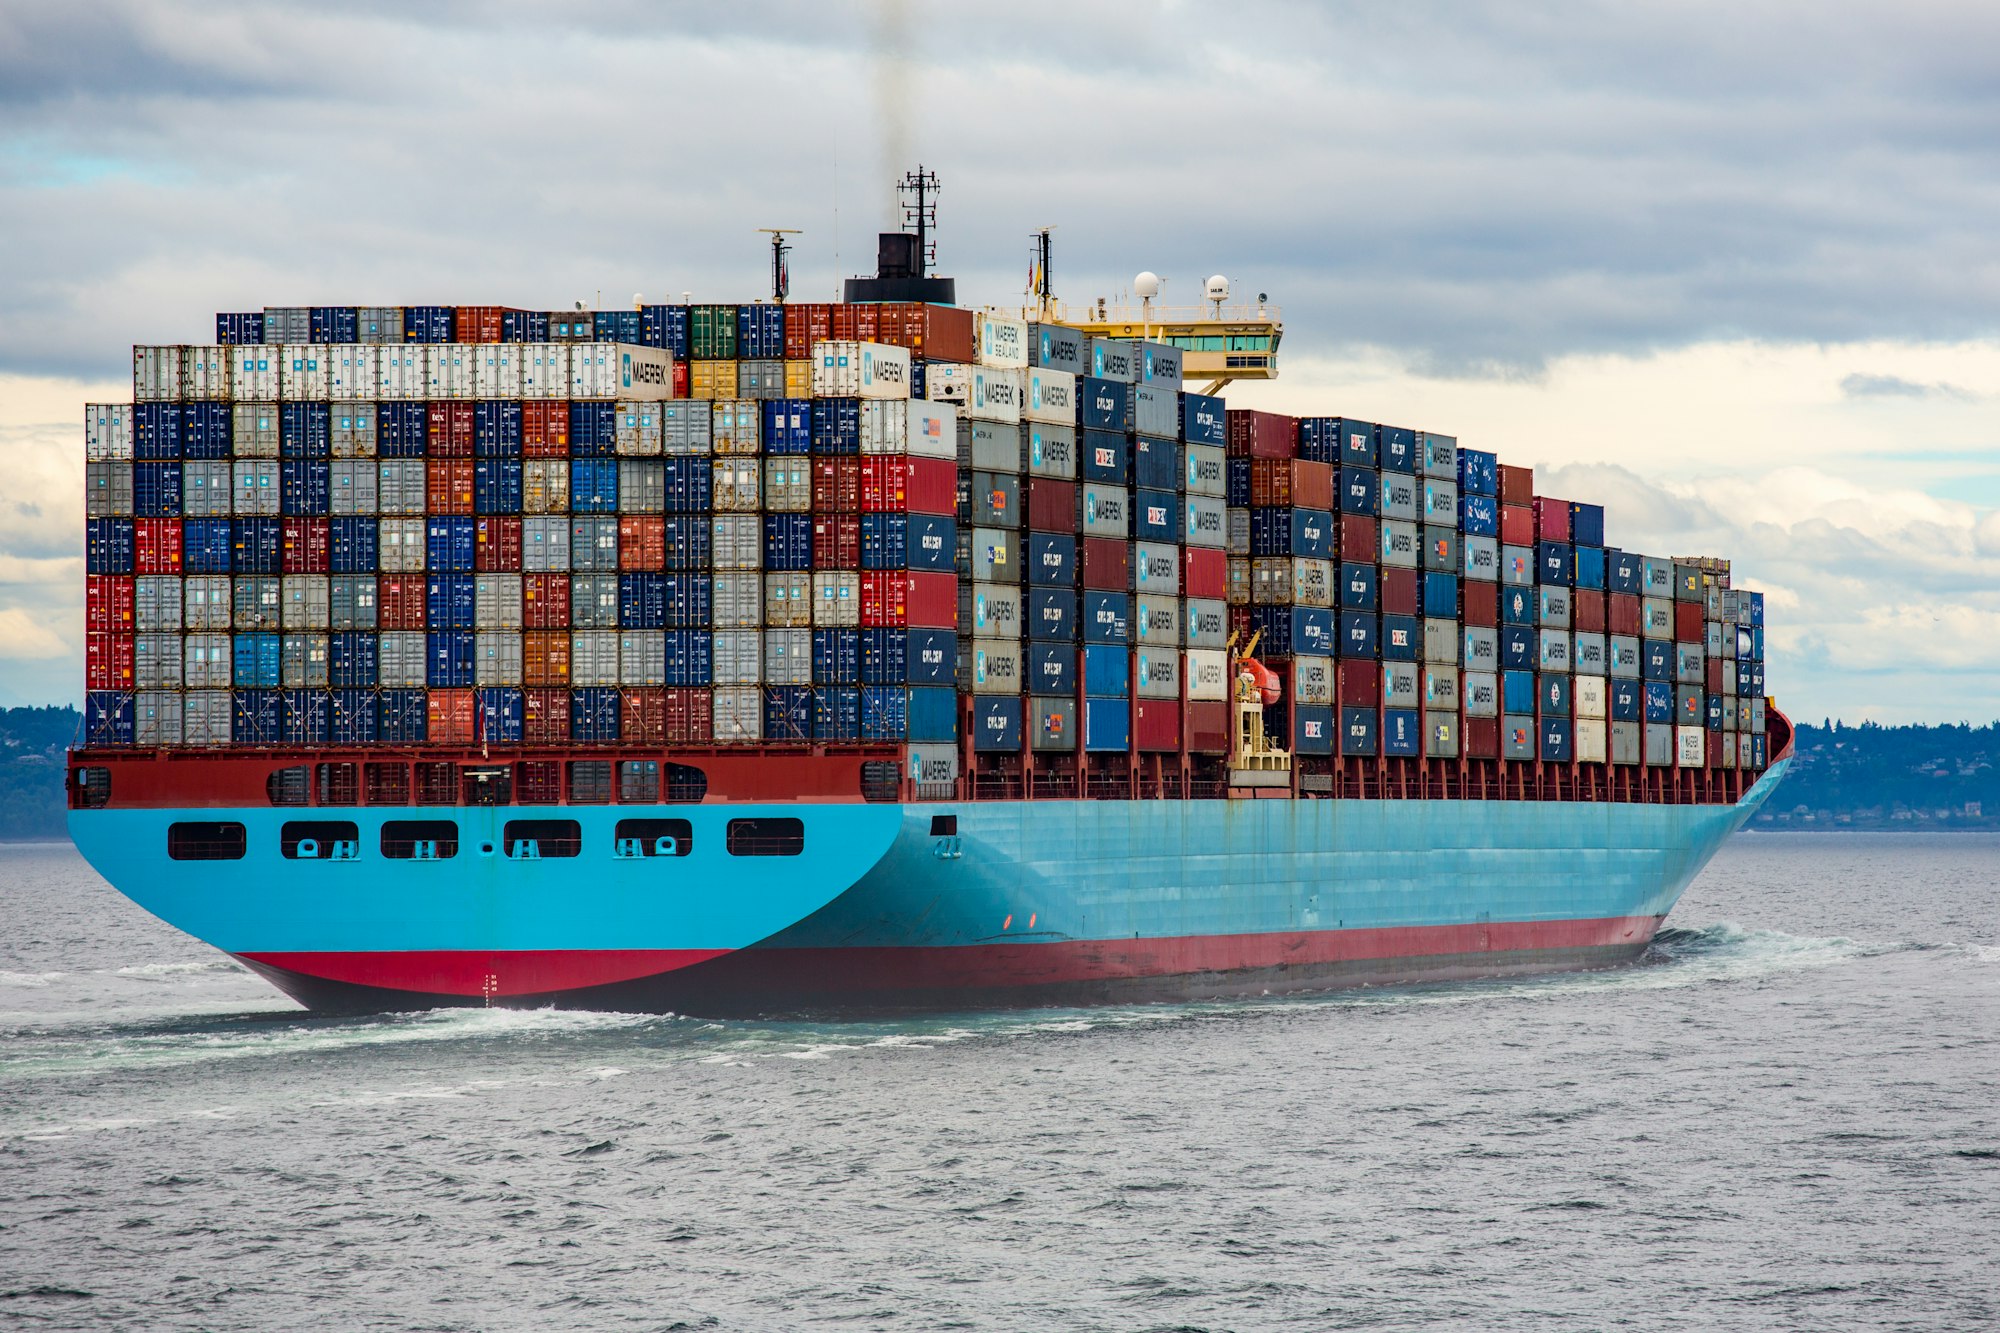 A fully-loaded container ship navigates the waters.